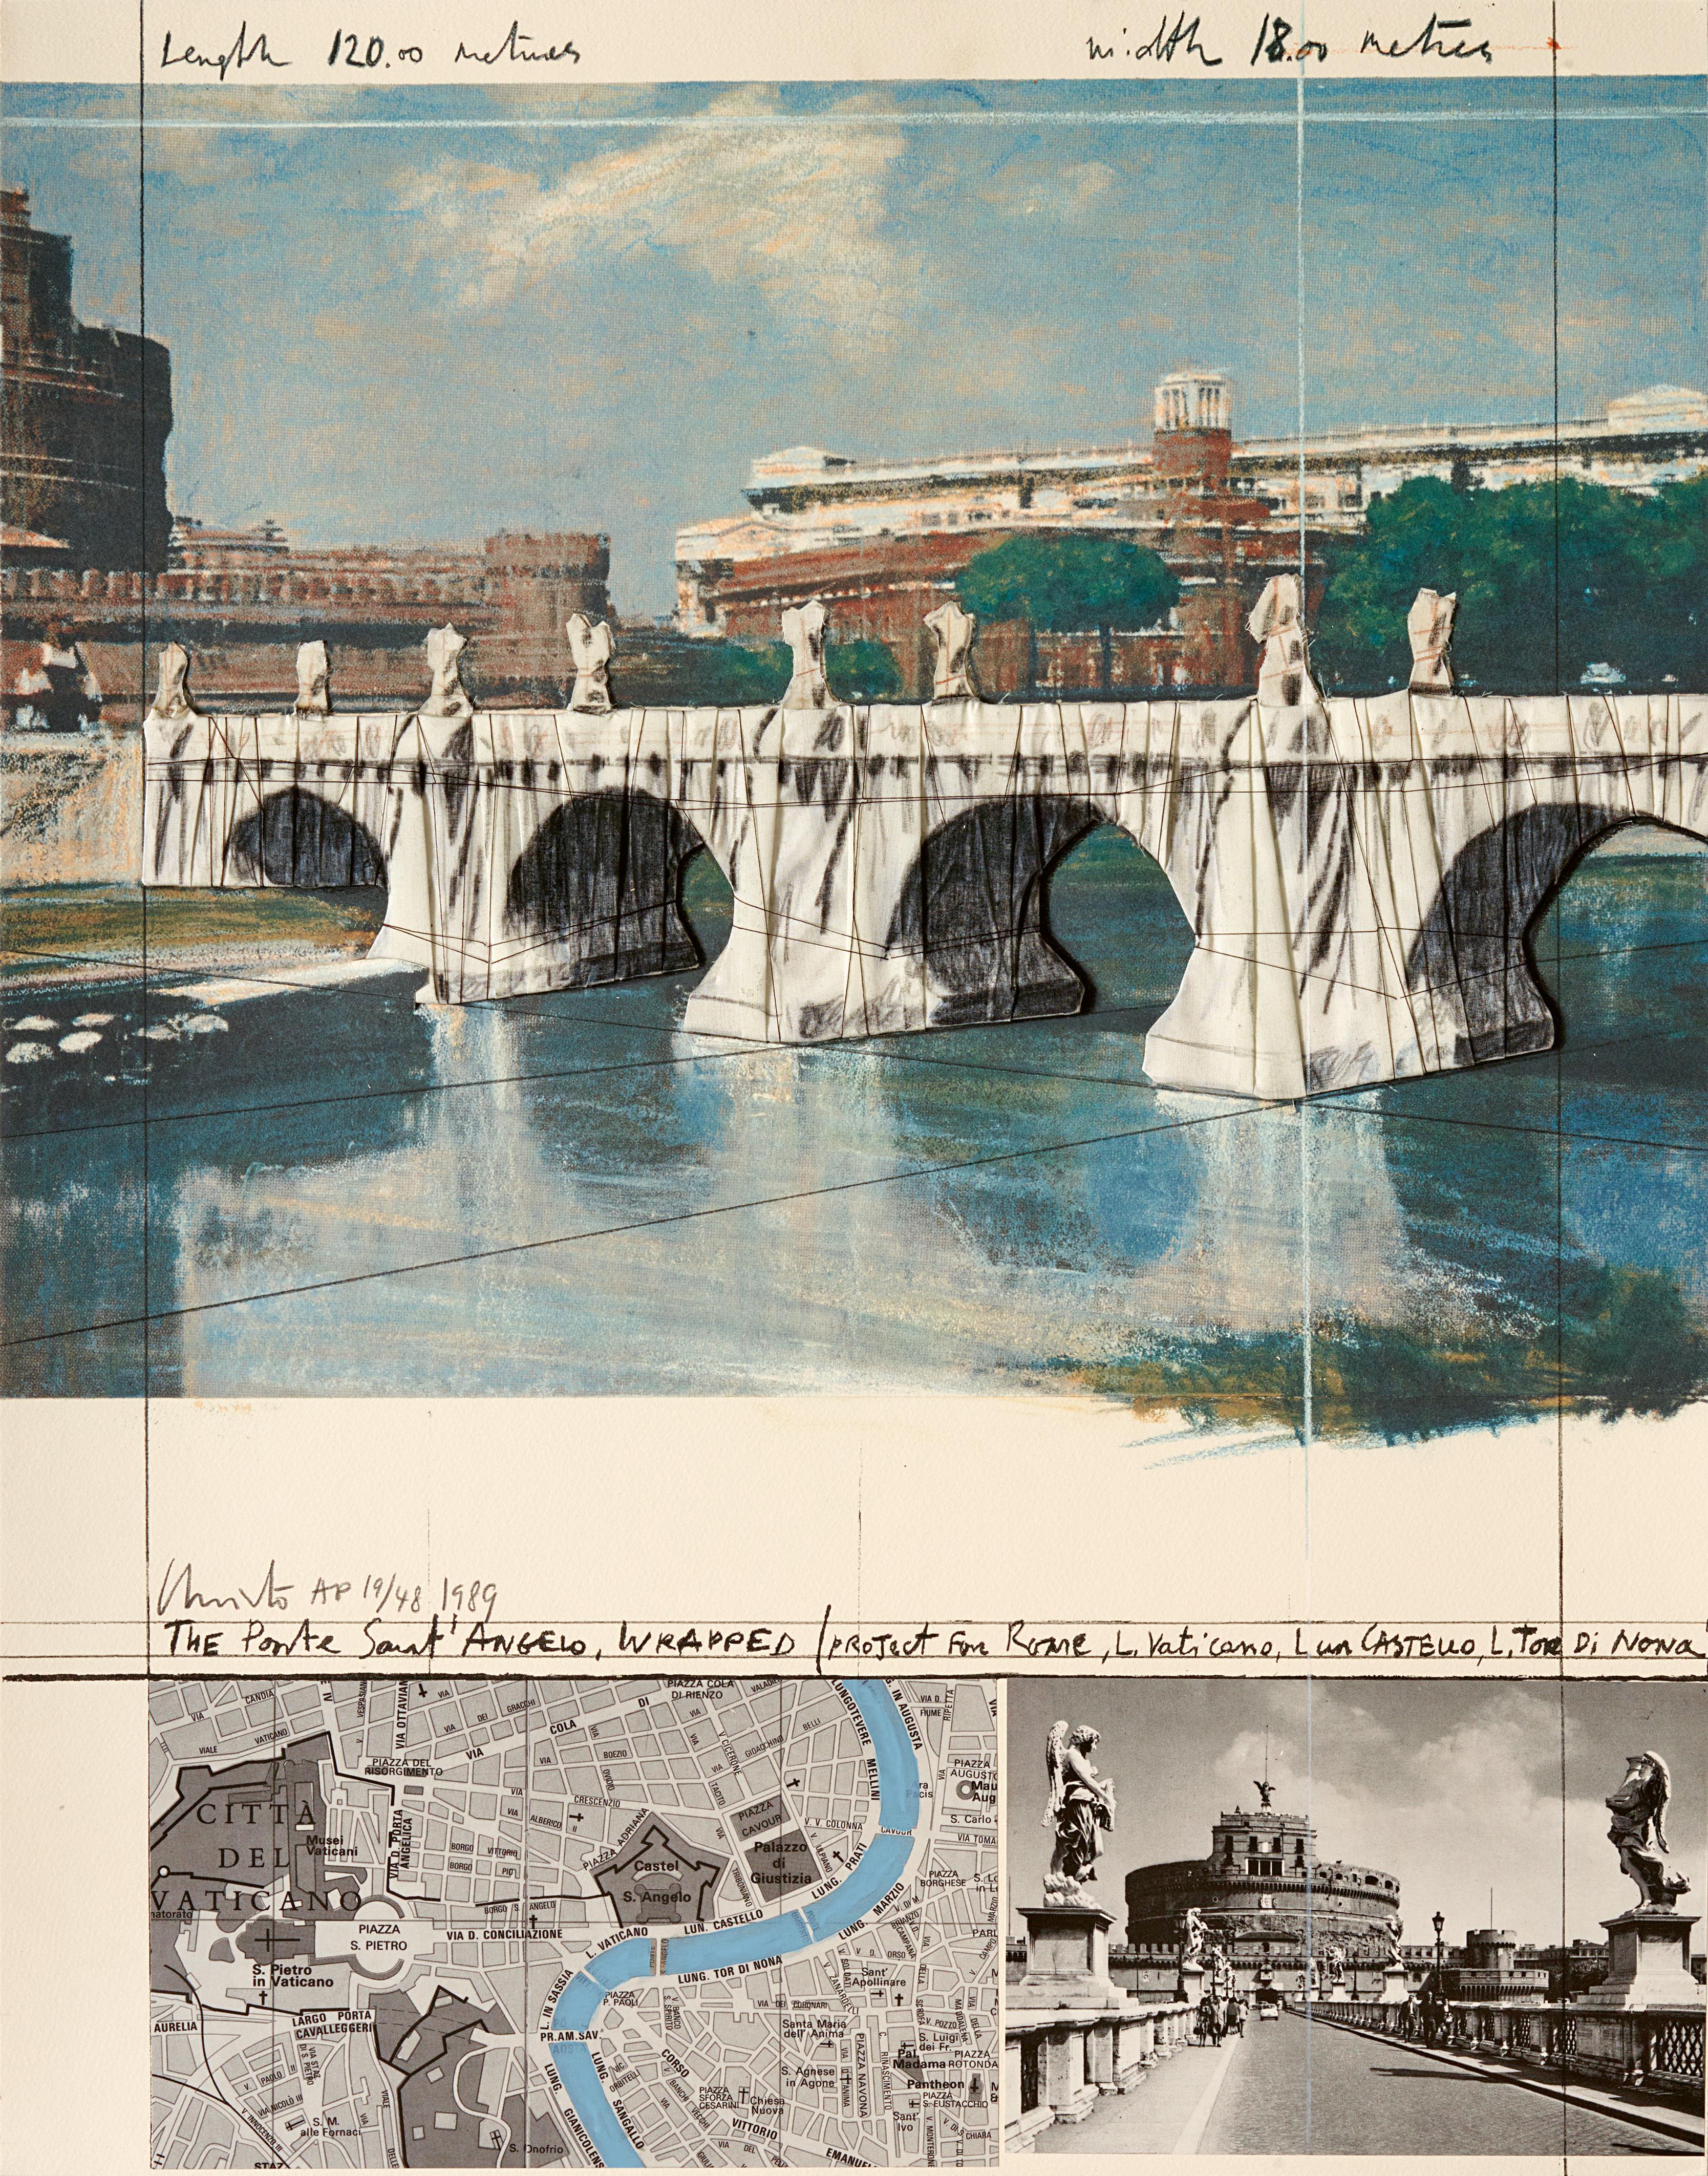 Christo - The Ponte Sant'Angelo, Wrapped, Project for Rome - image-1